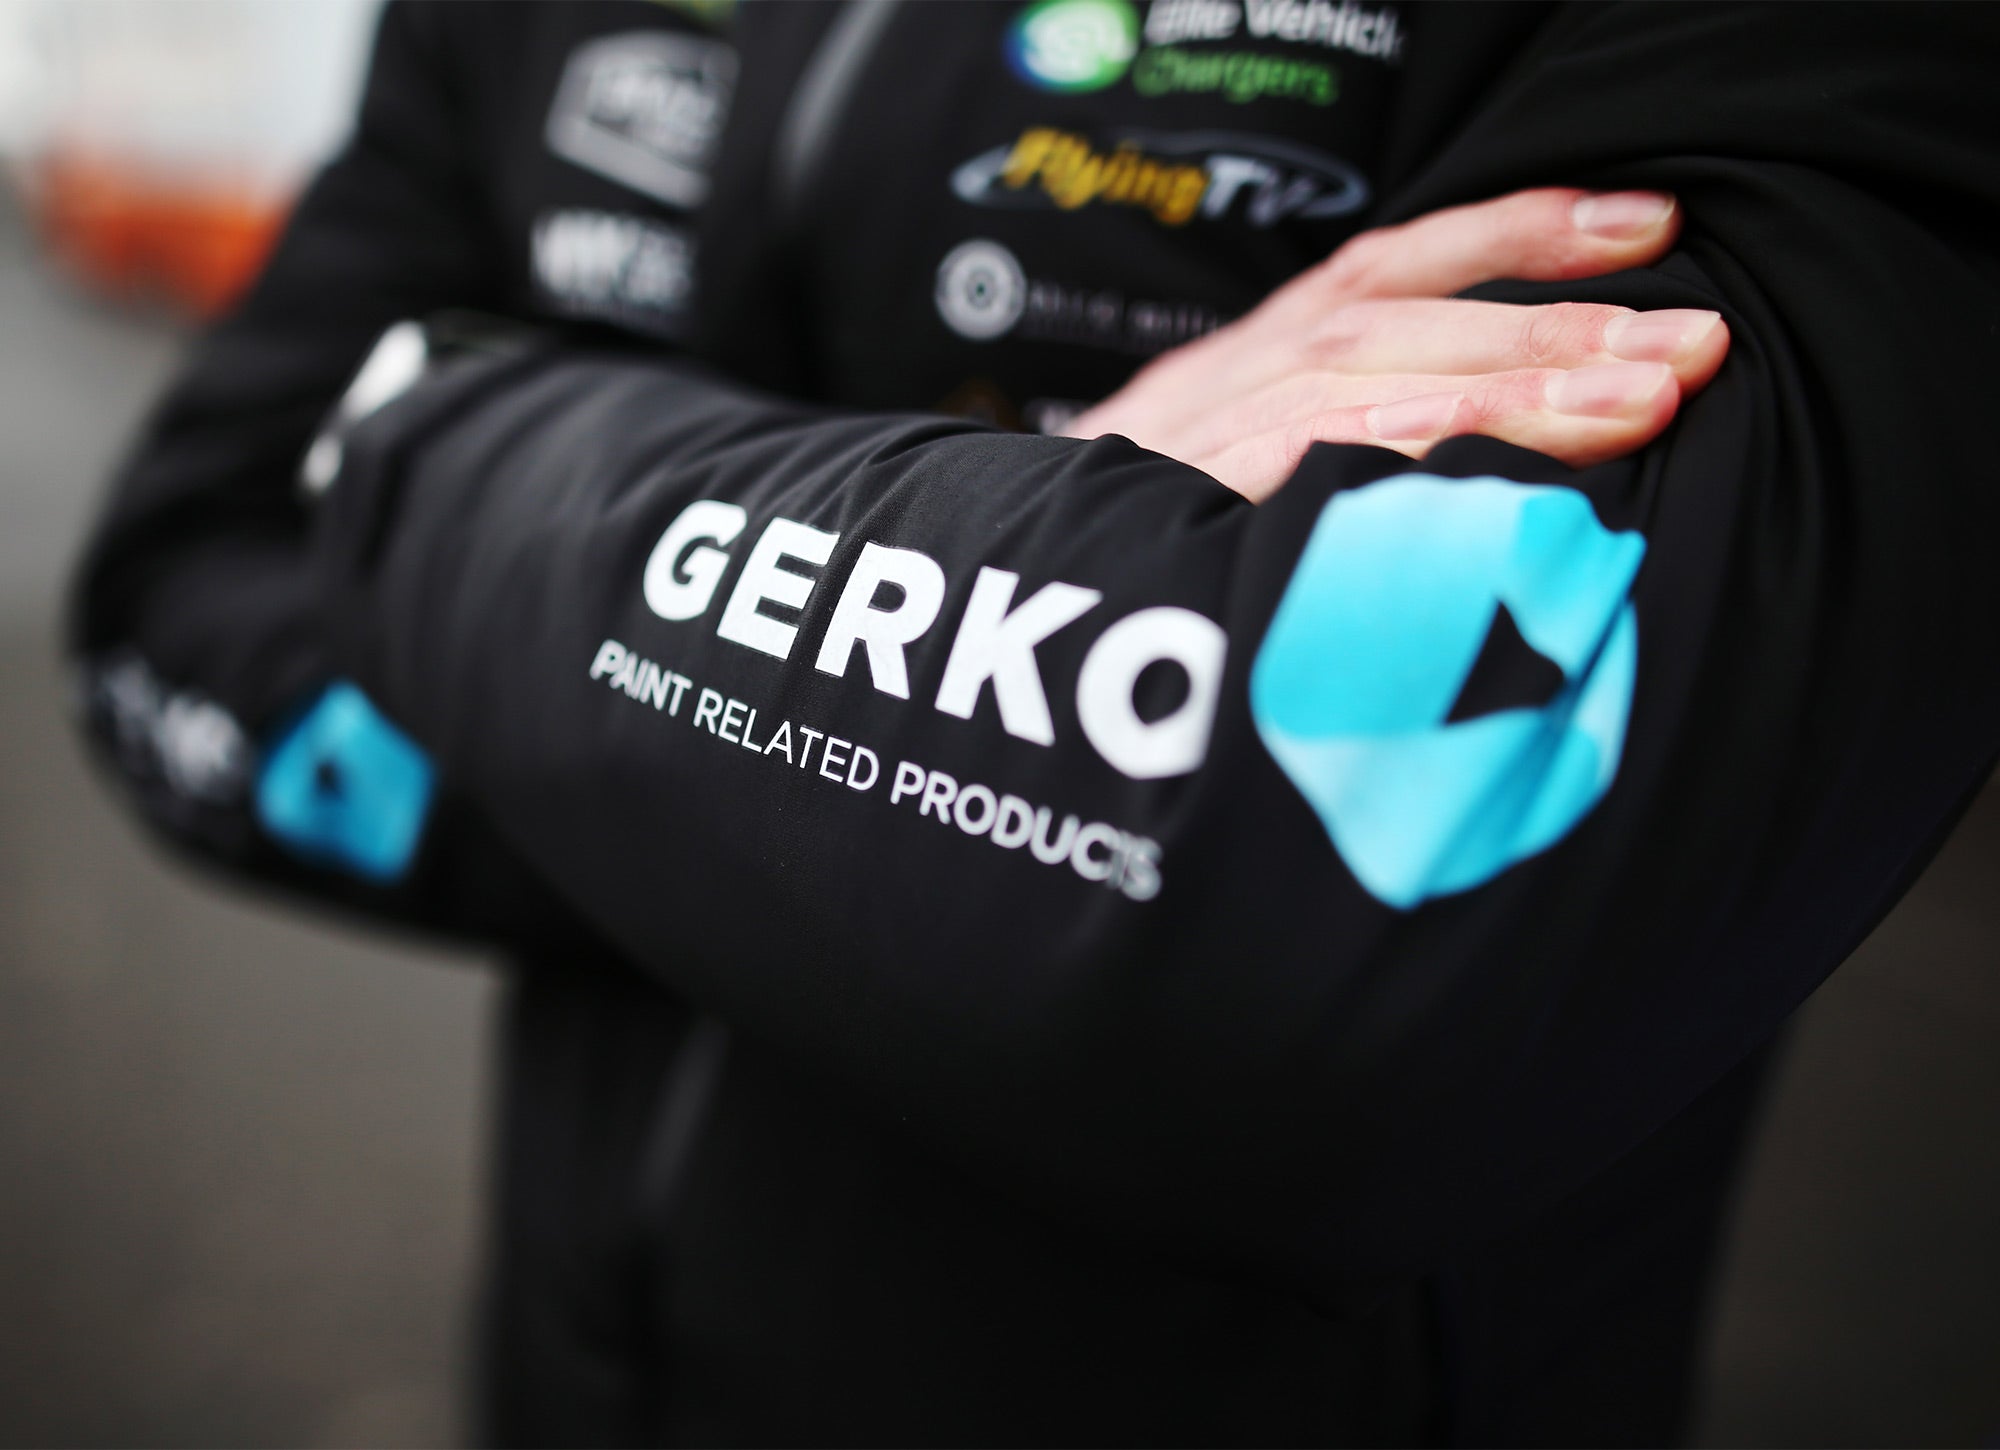 Gravett Racing Extends Partnership with Paint Related Products Brand GERKO International